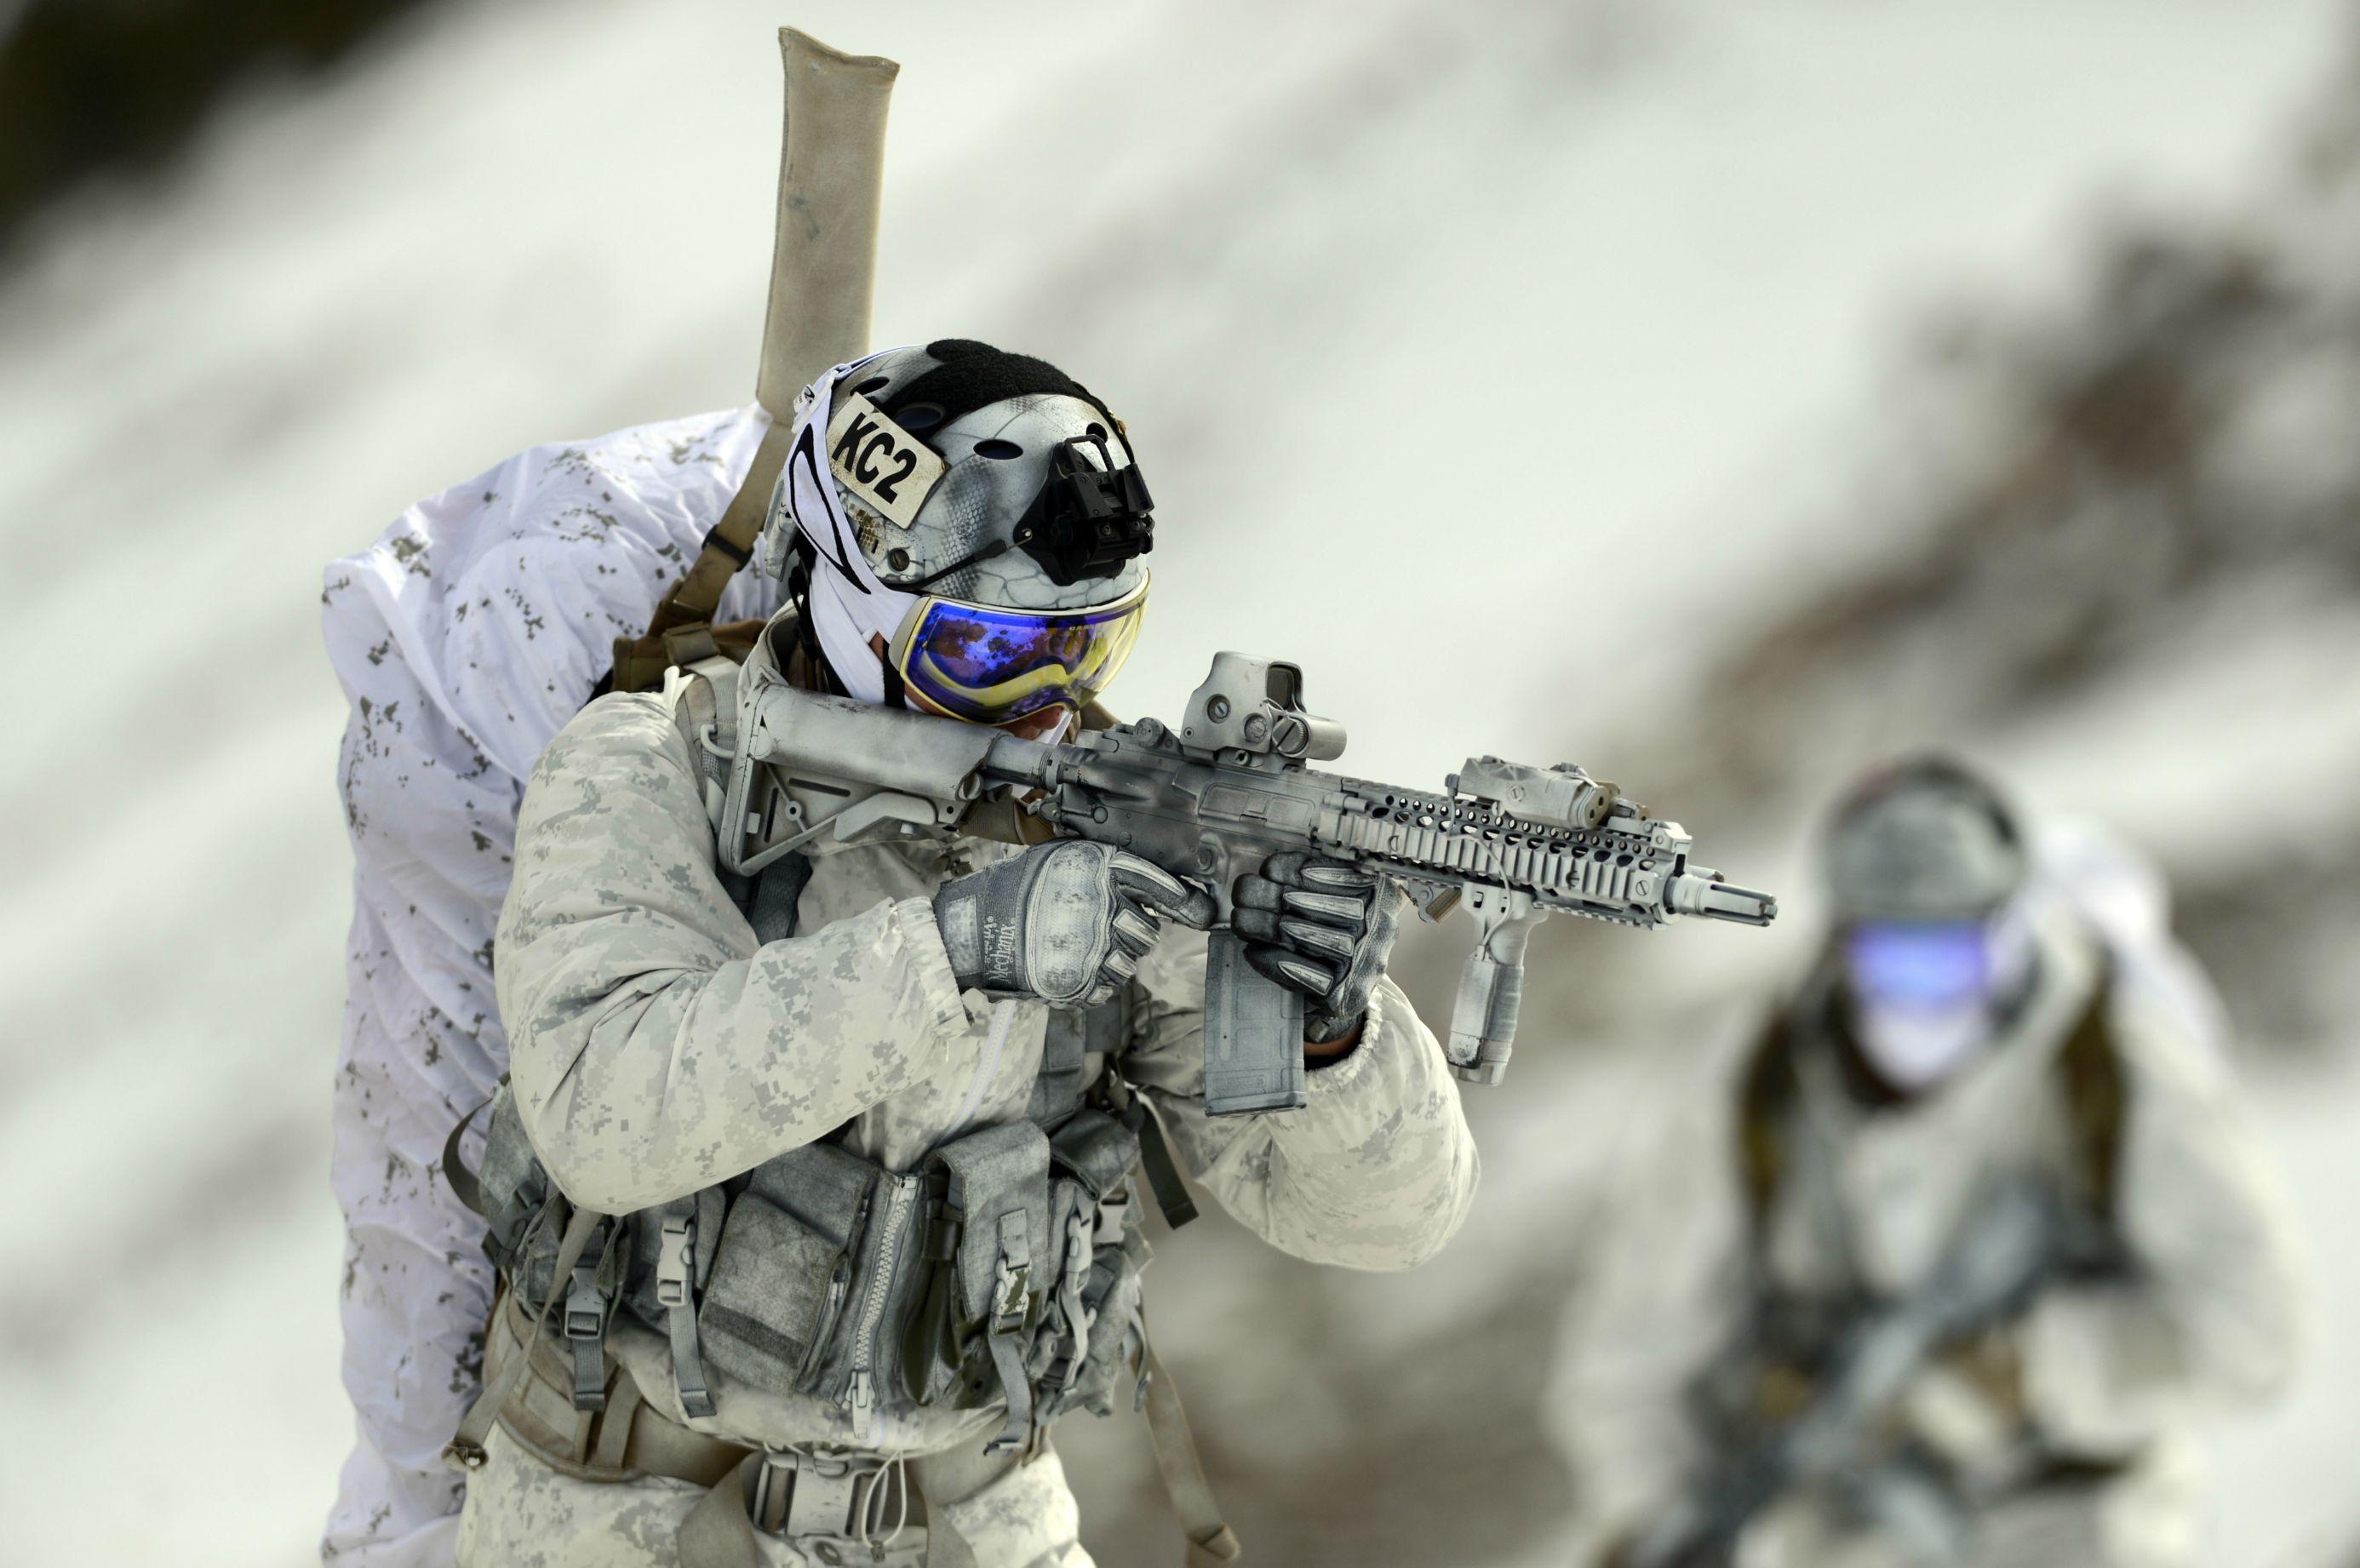 Wallpaper, snow, winter, soldier, military, army, Navy SEALs, Mk 18